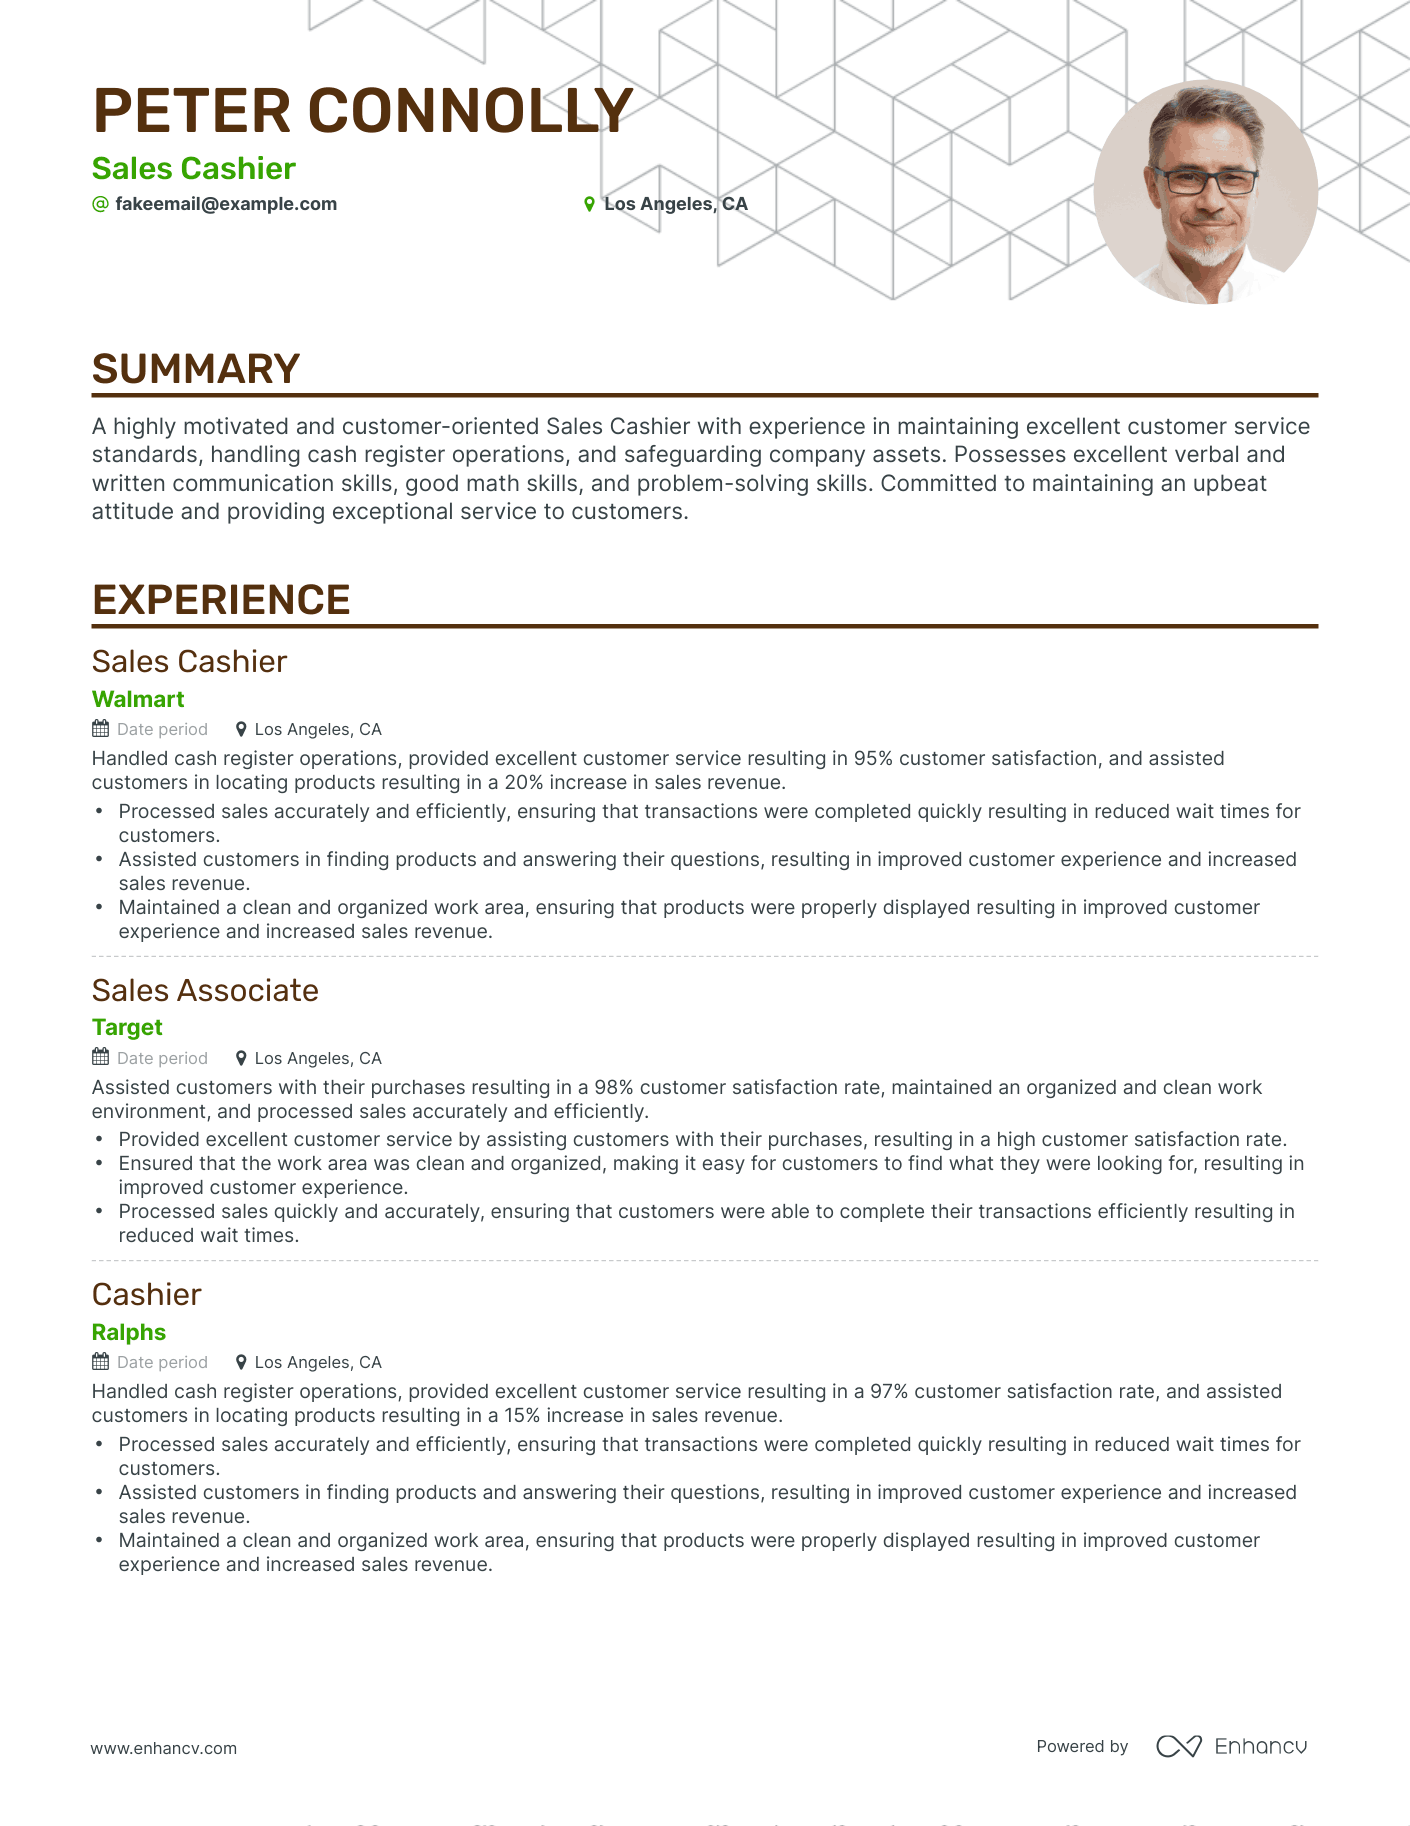 Classic Sales Cashier Resume Template